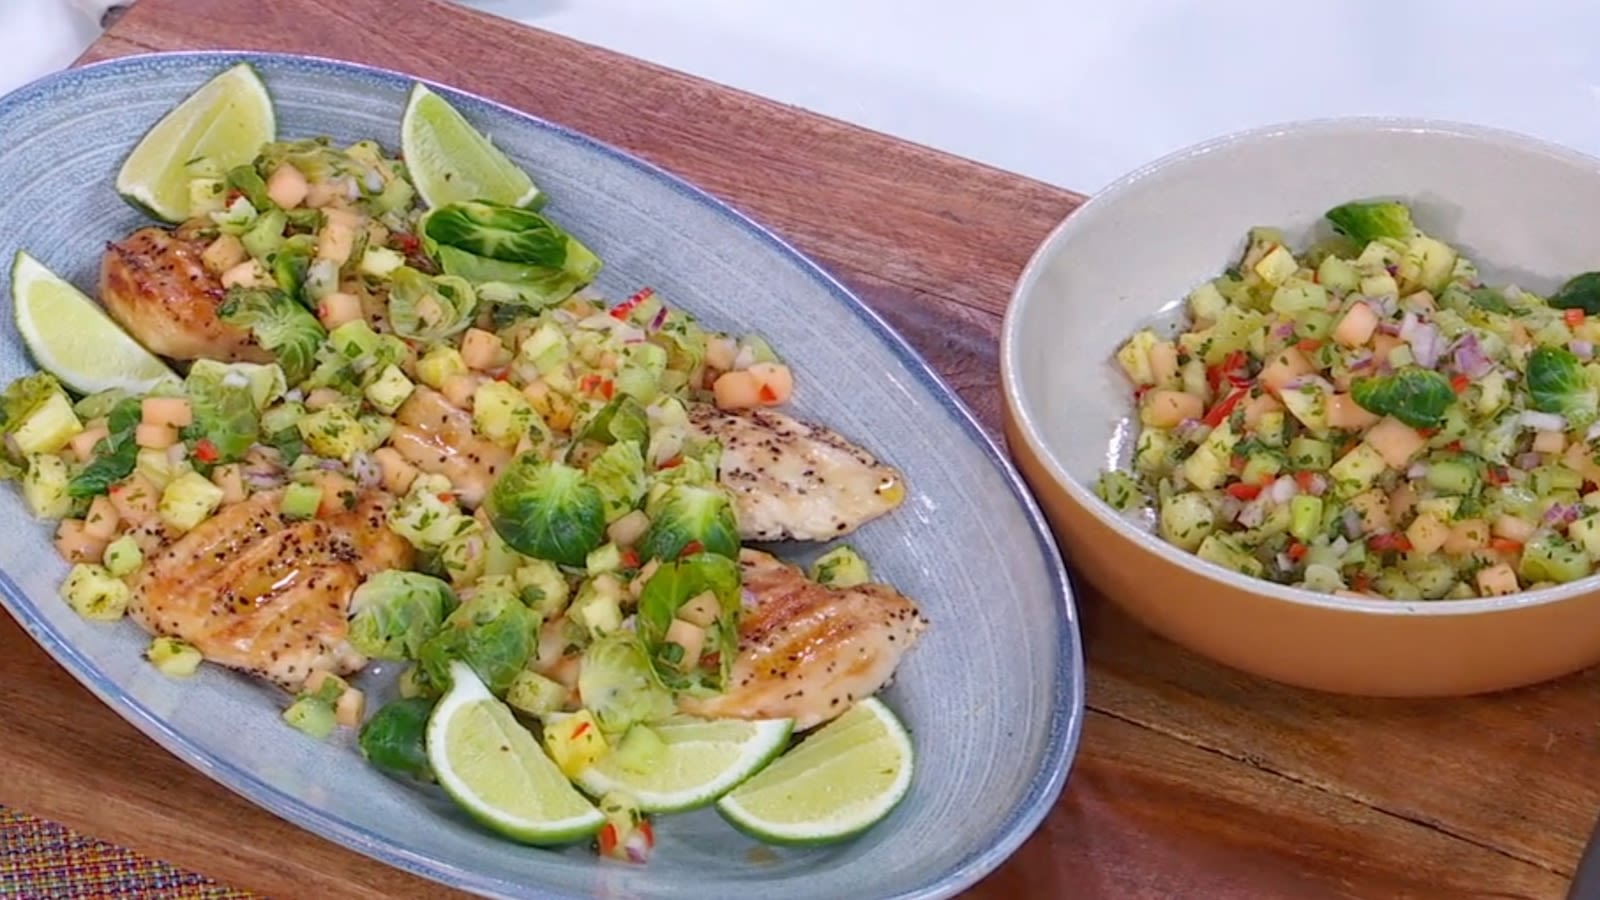 Entertain this summer with Robert Irvine's chicken and pineapple salsa